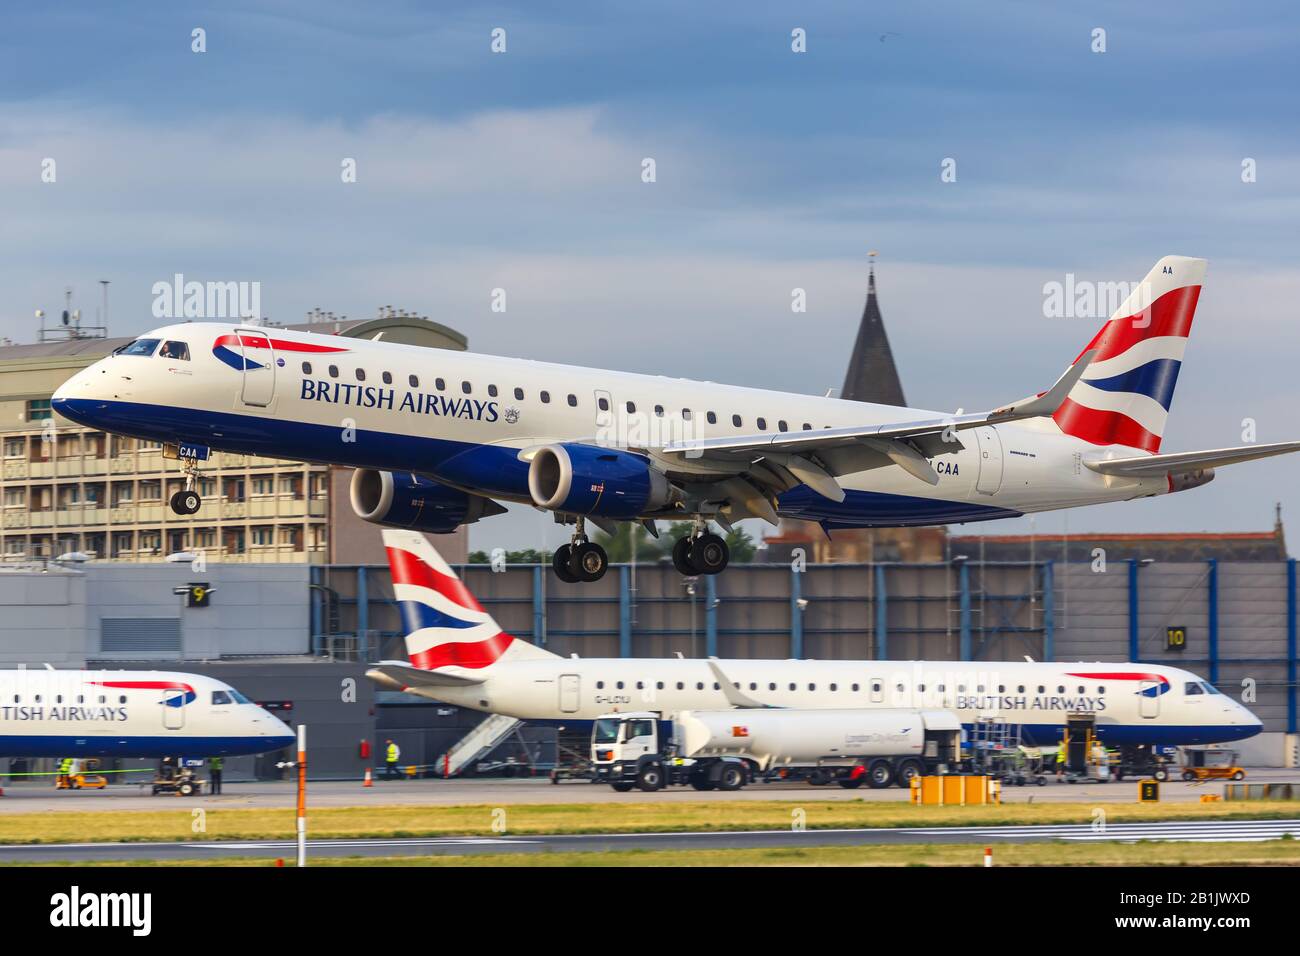 London, United Kingdom – July 8, 2019: British Airways BA CityFlyer Embraer 190 airplane at London City airport (LCY) in the United Kingdom. Stock Photo